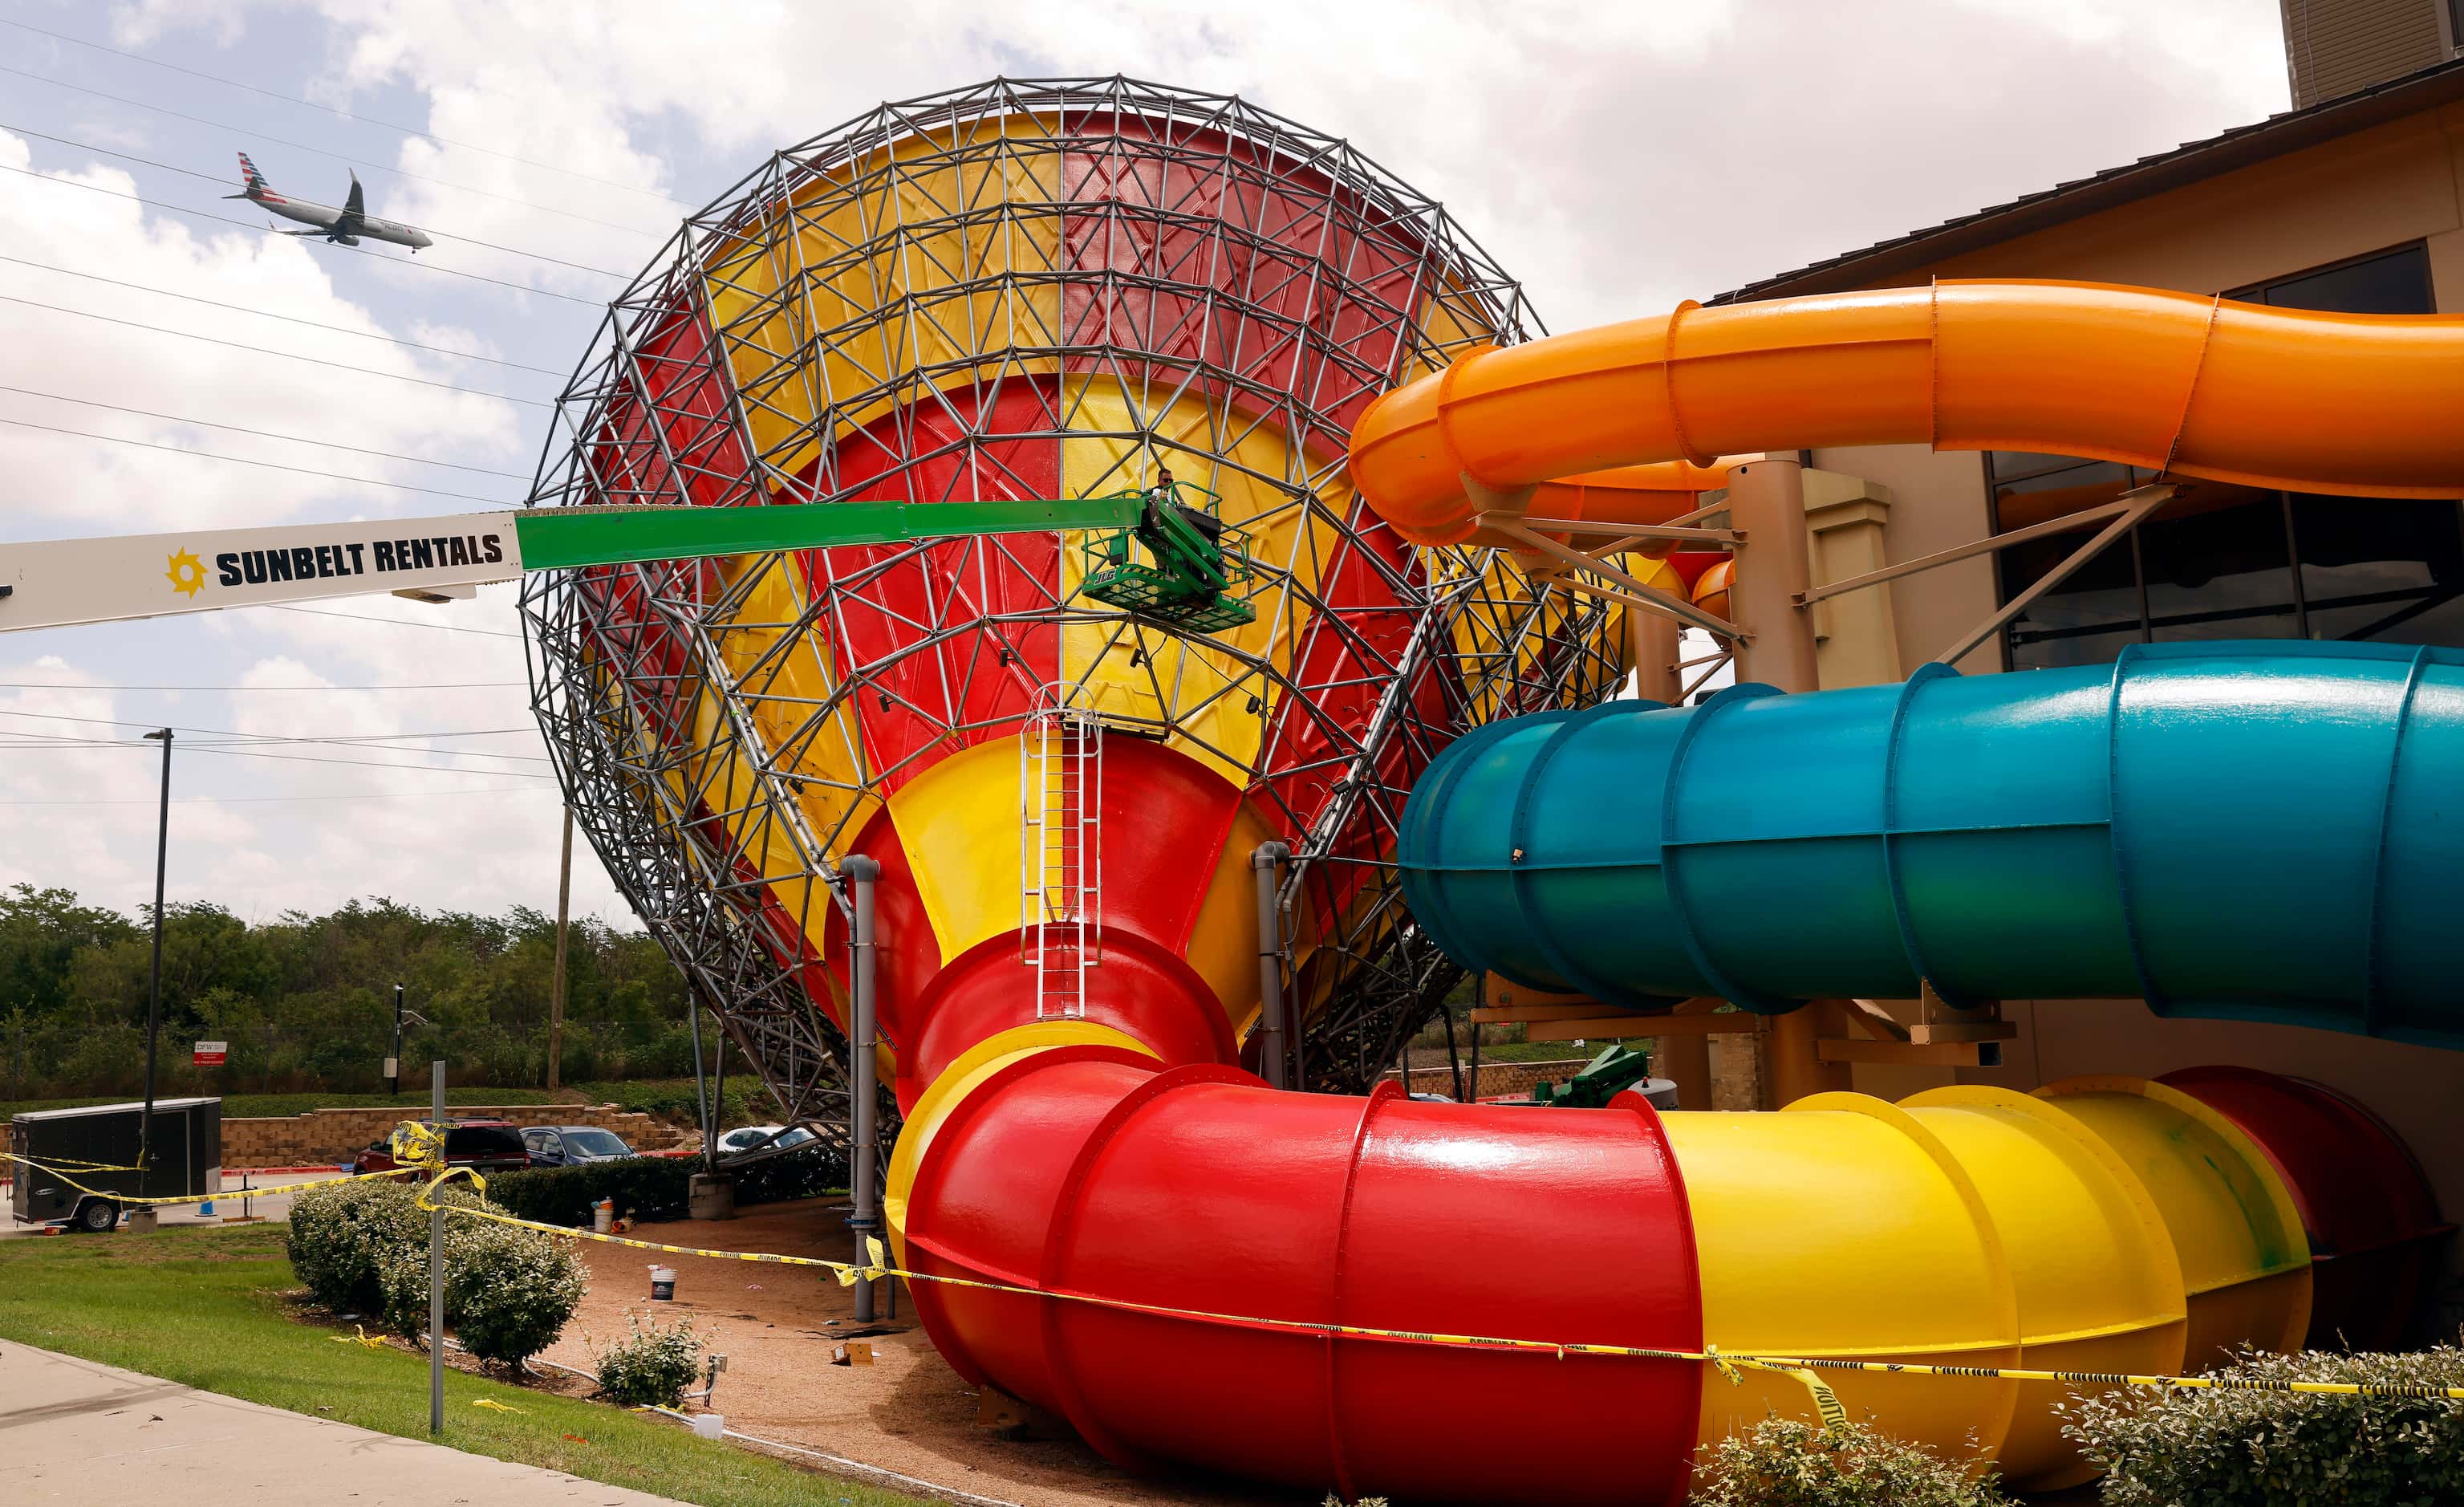 A crew works on the Howlin’ Tornado at the Great Wolf Lodge waterpark in Grapevine, Texas as...